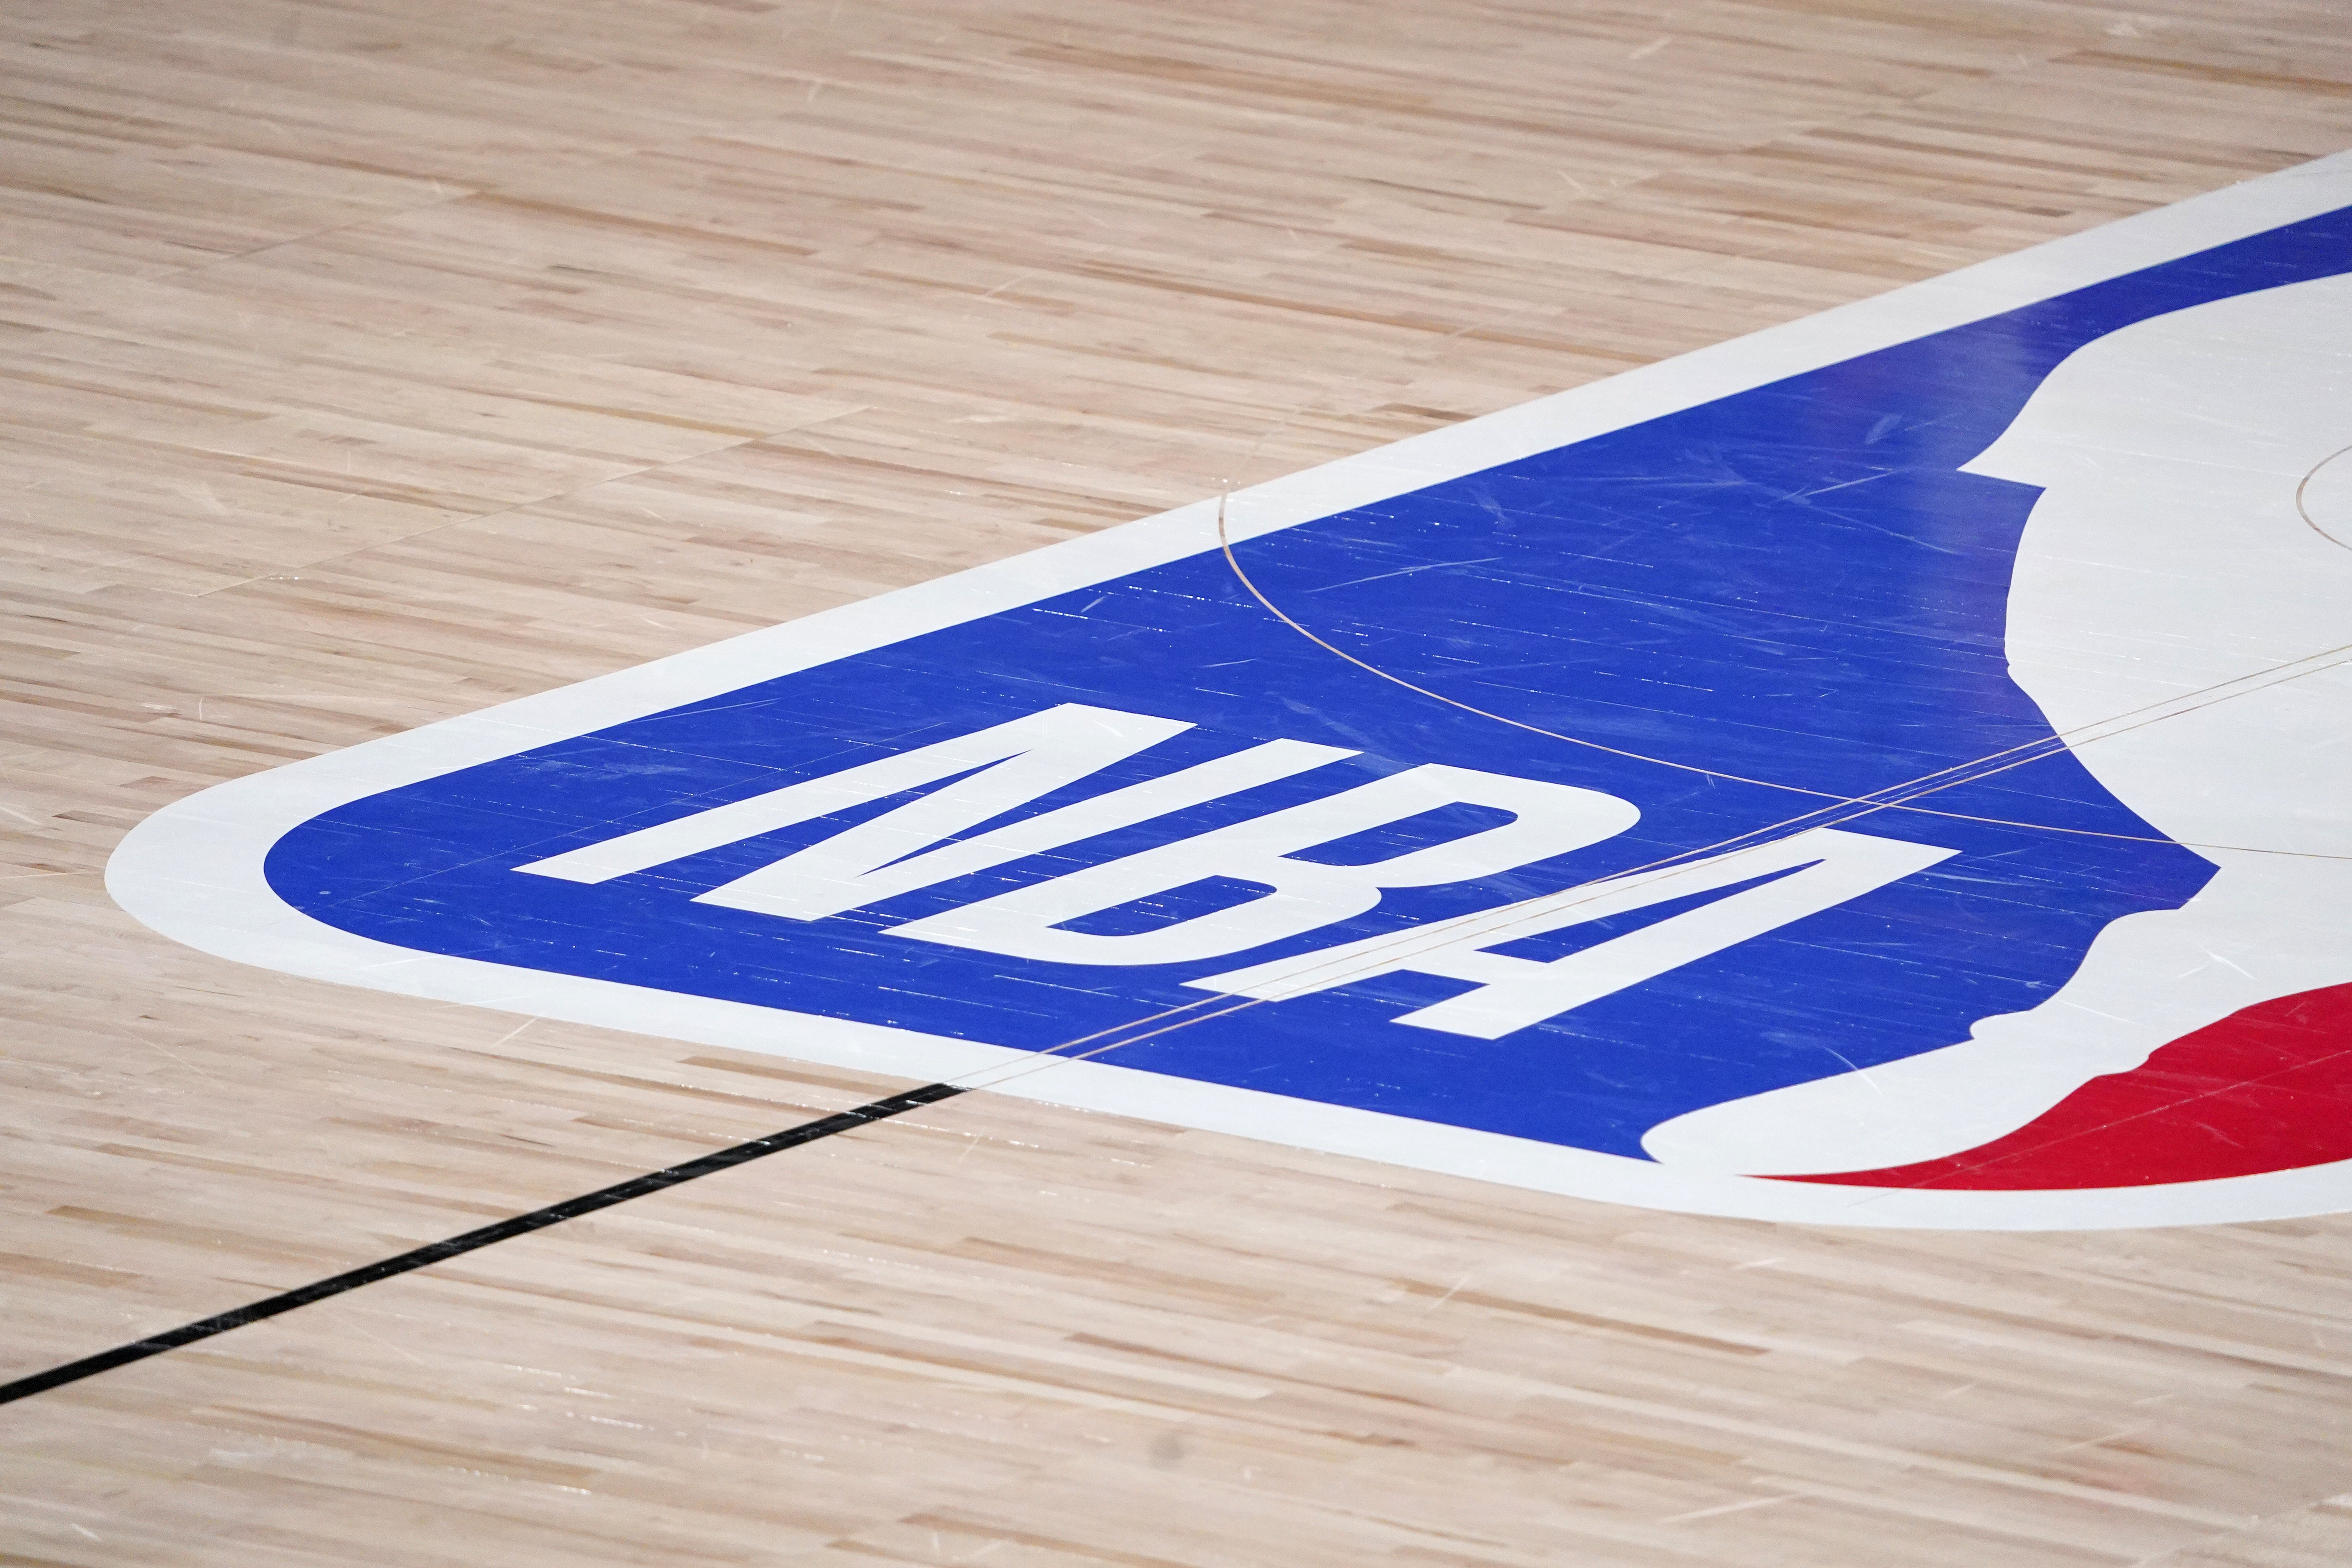 Nba Schedule Release 2022 23 Nba Schedule 2022: Regular Season, Playoffs, Finals And Key Dates  Reportedly Revealed | Bleacher Report | Latest News, Videos And Highlights